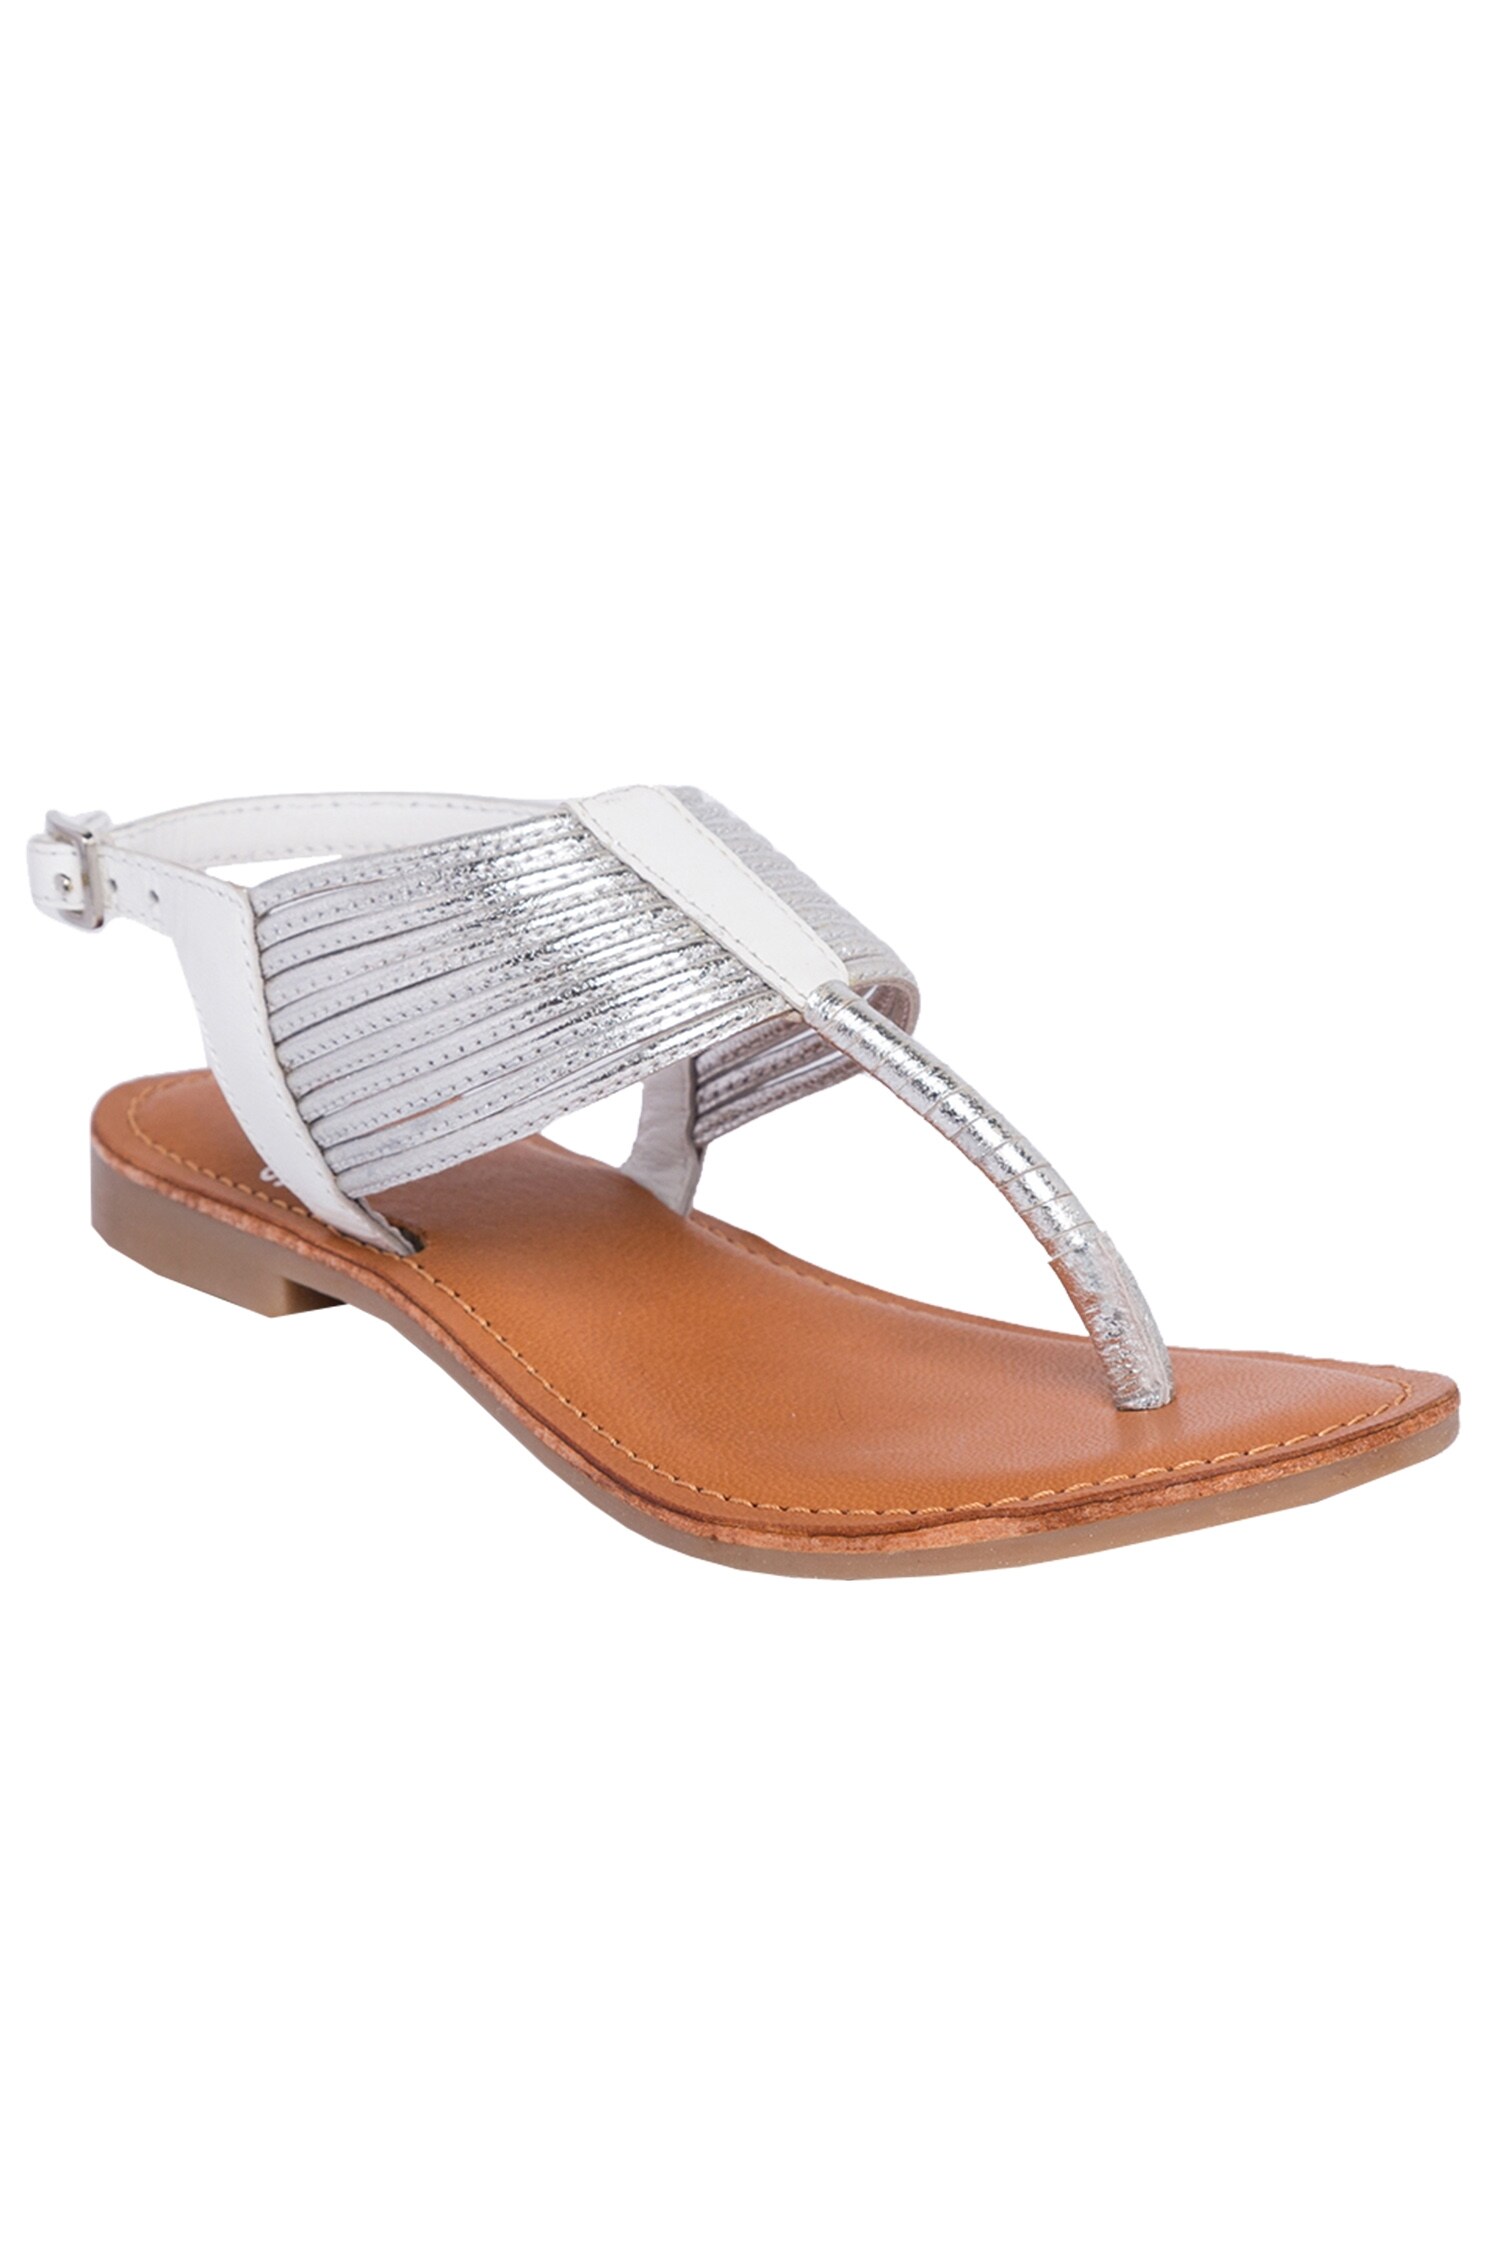 Buy Sole Fry White Sling Back Flat Sandals Online | Aza Fashions